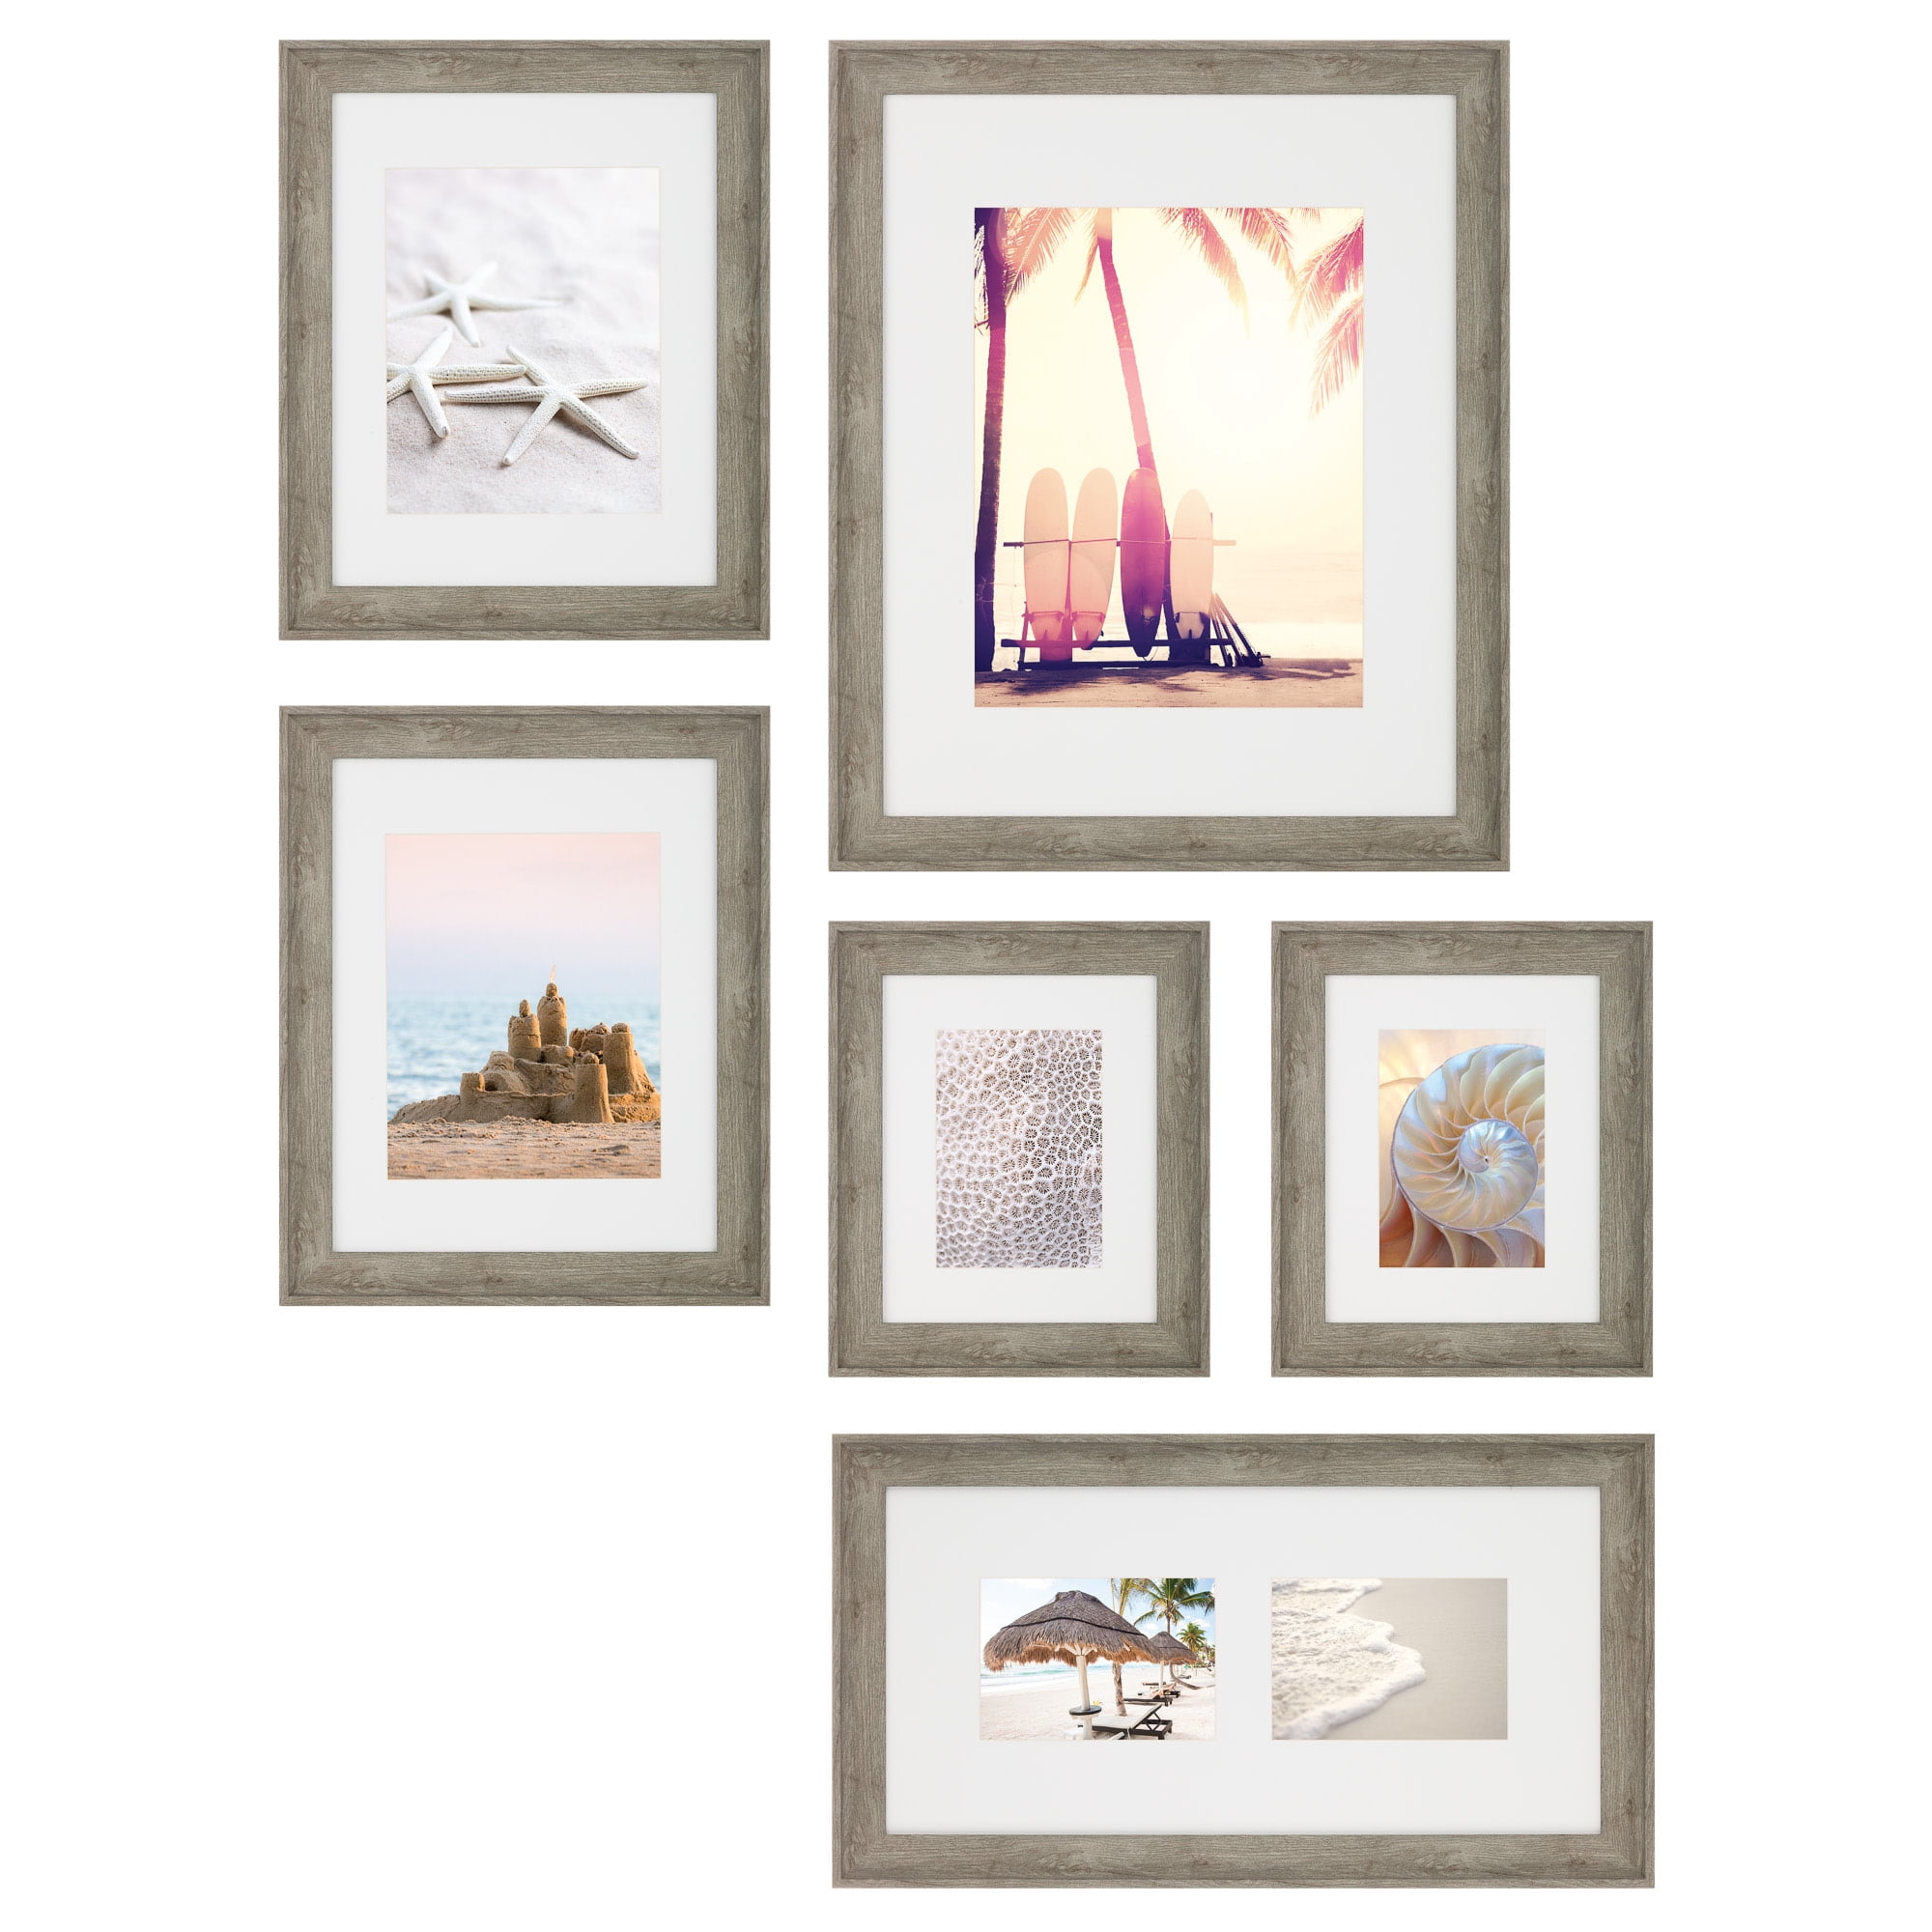 Instapoints 6 Piece Gallery Wall Picture Frame Set in Multiple Sizes with  Decorative Art Prints & Hanging Template 